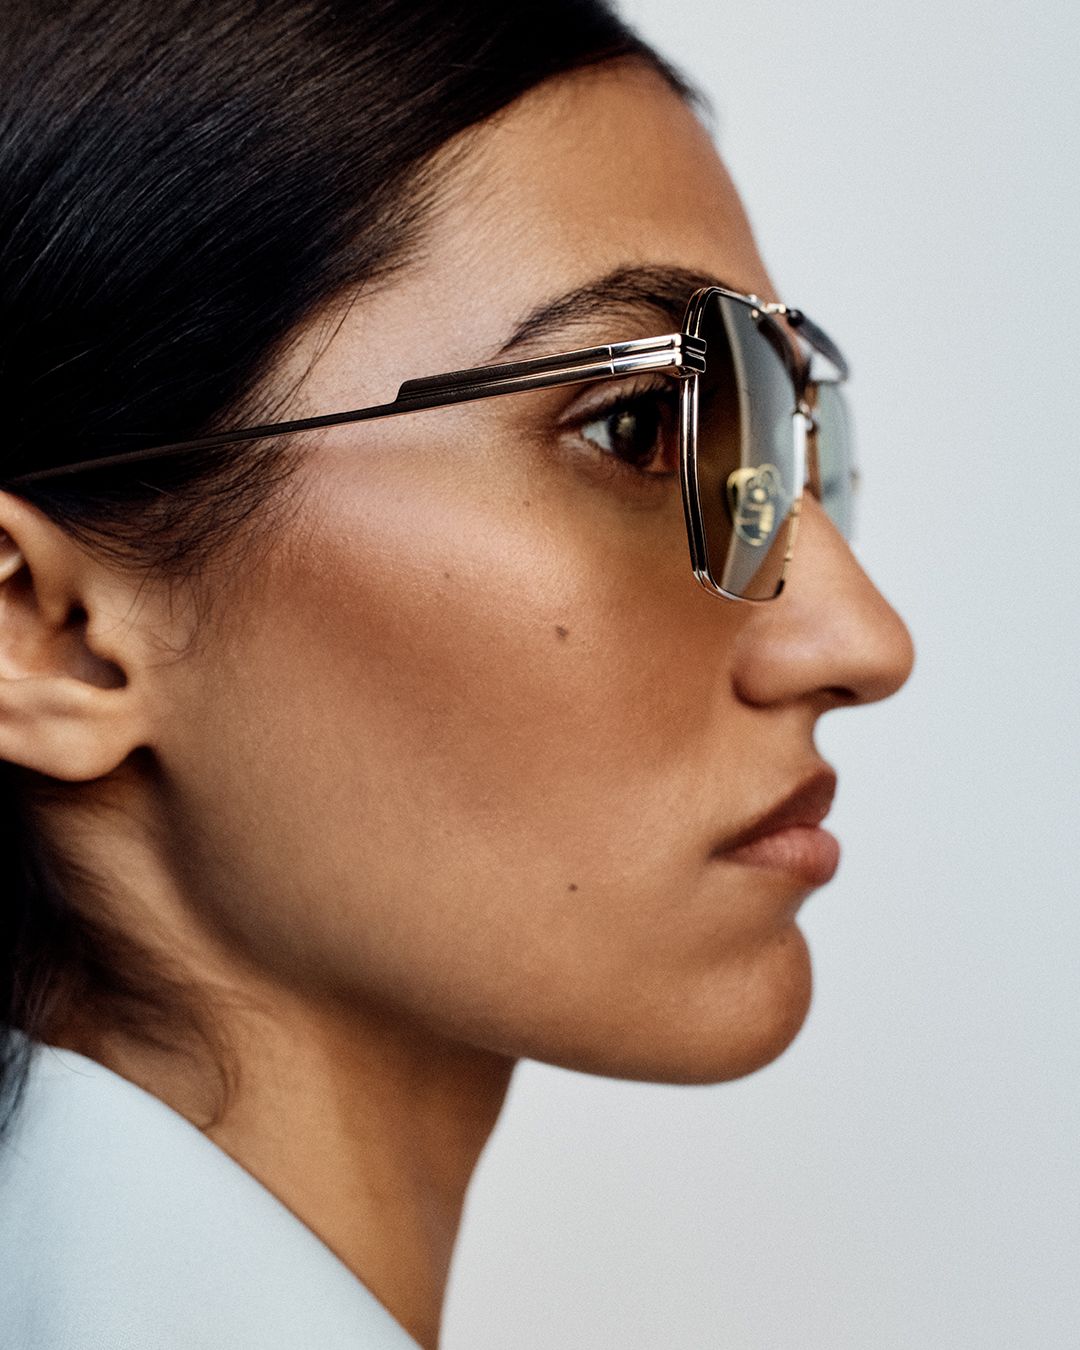 Close up of model's face looking to the side wearing aviator sunglasses